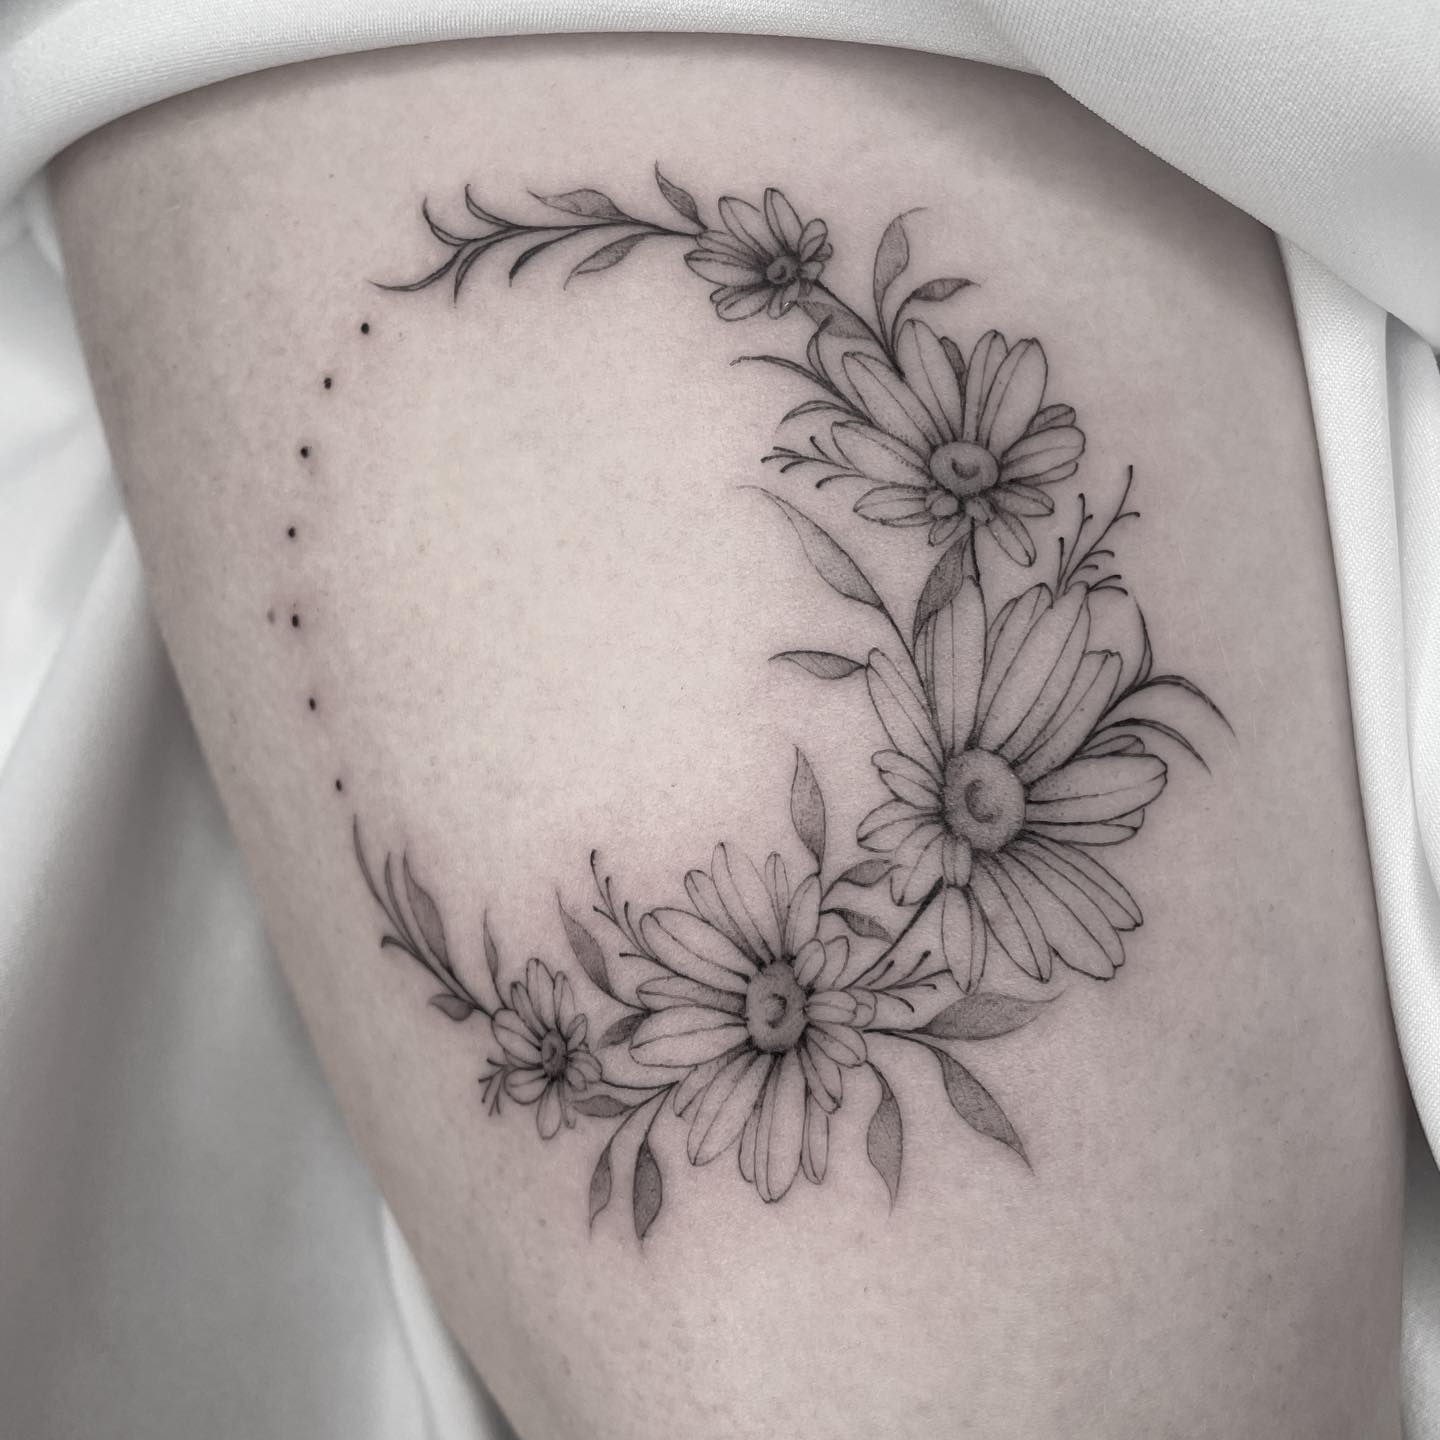 Micro-realistic daisy flowers tattooed on the upper